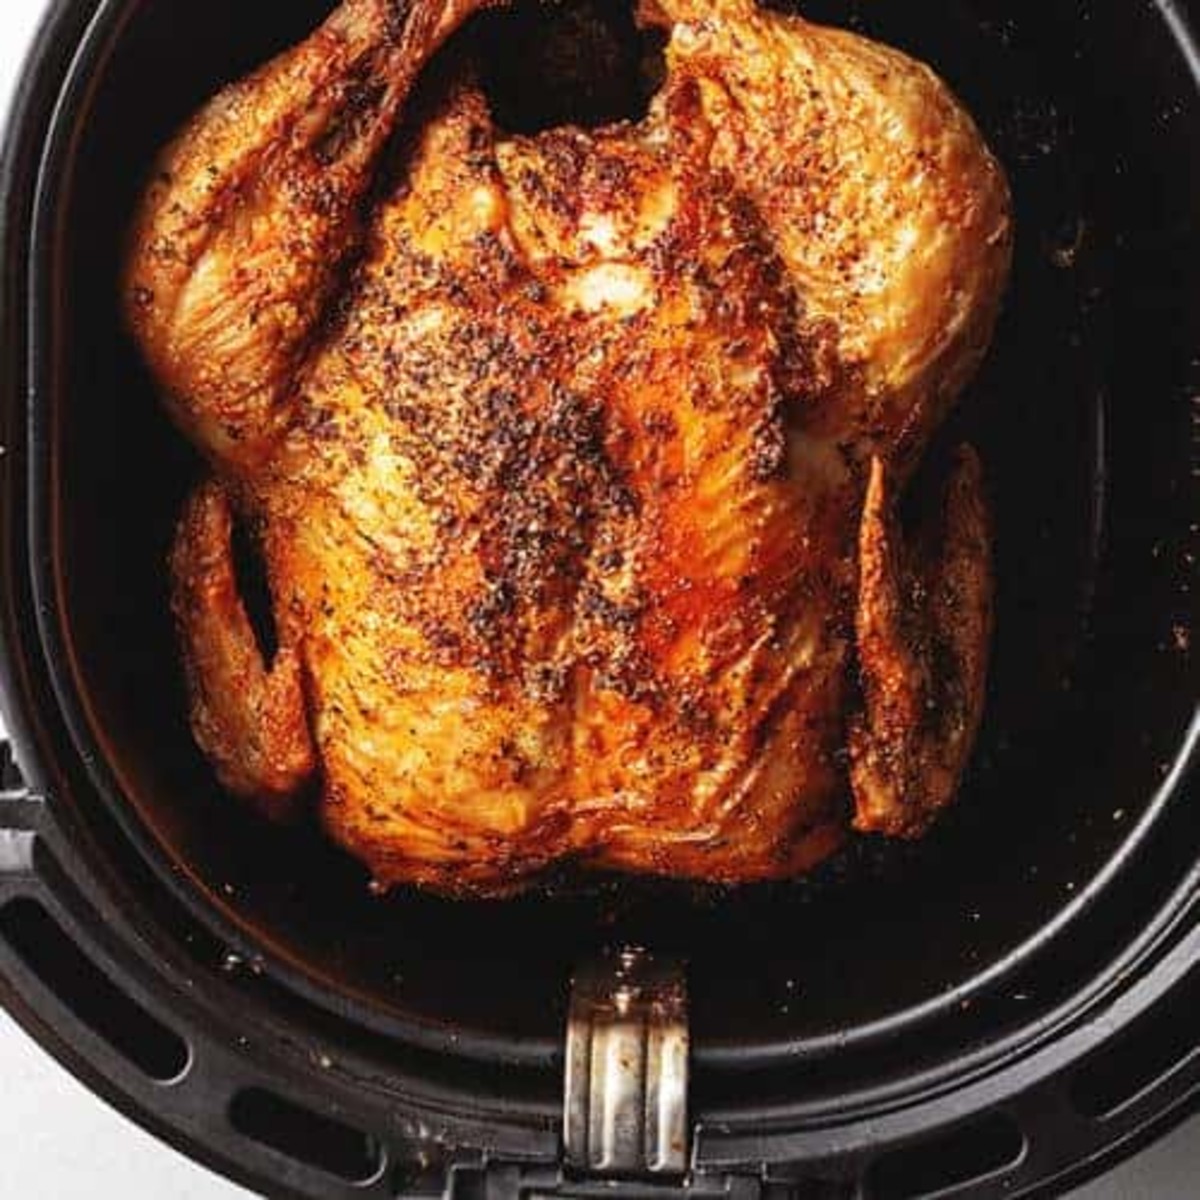 15-things-you-didnt-know-you-could-make-in-an-air-fryer